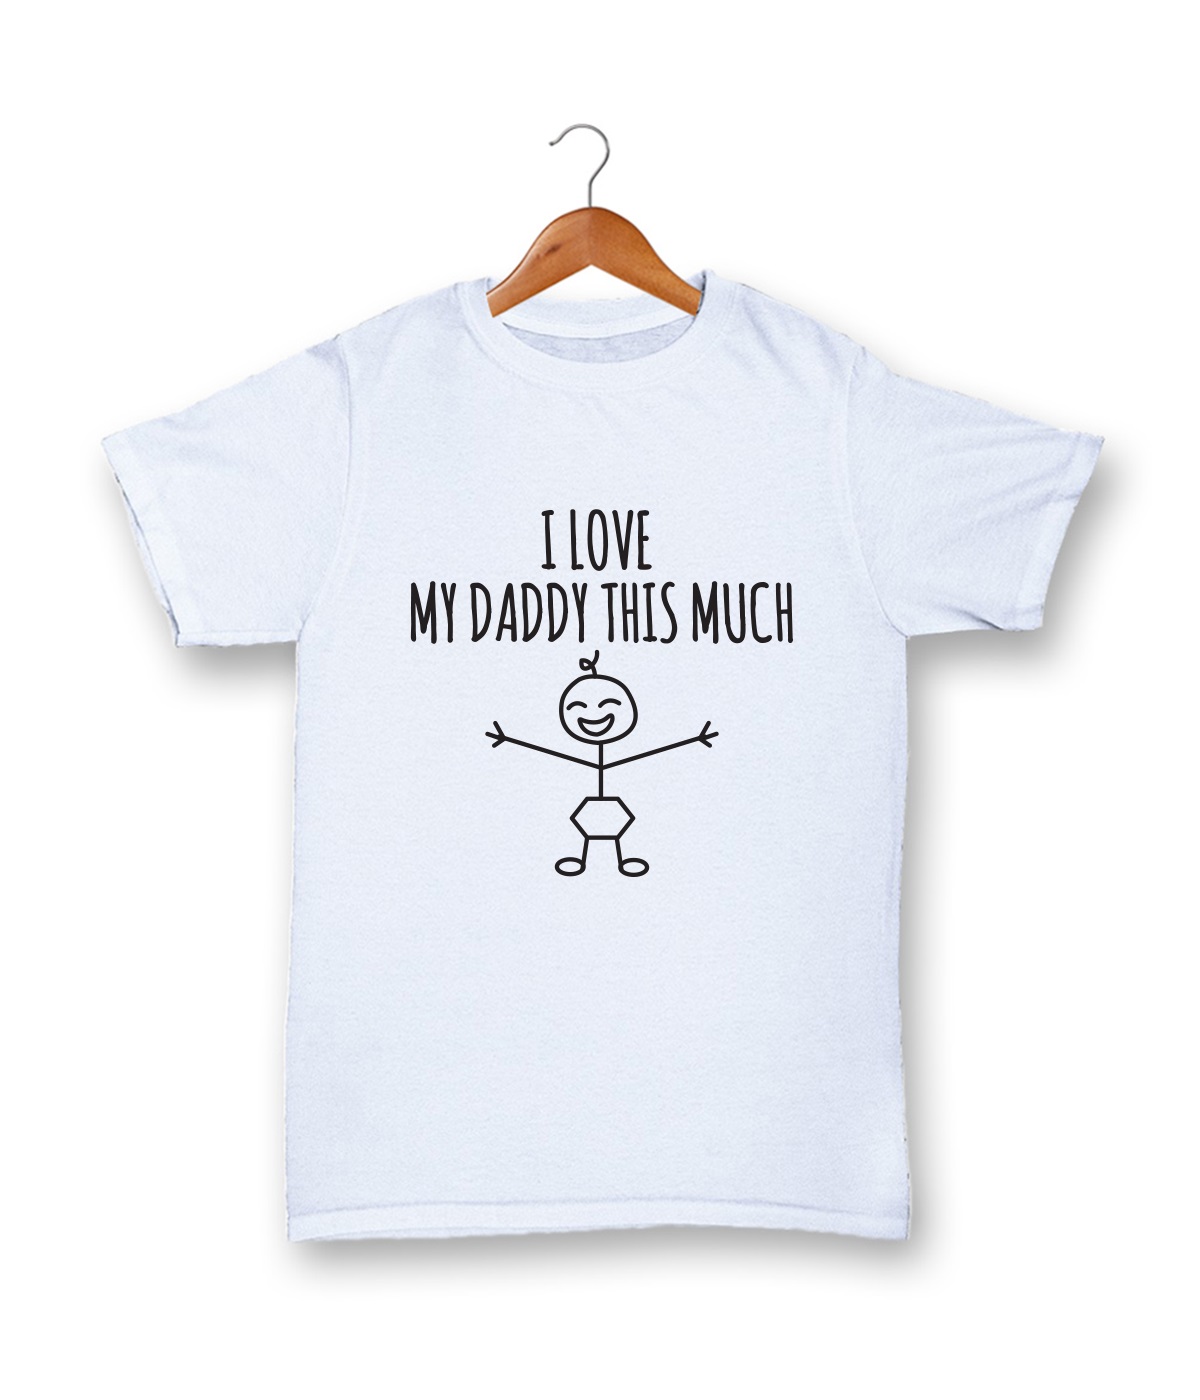 White T-shirt, 100% cotton, machine washable. Age 1-2 years. Print: I Heart My Daddy This Much.